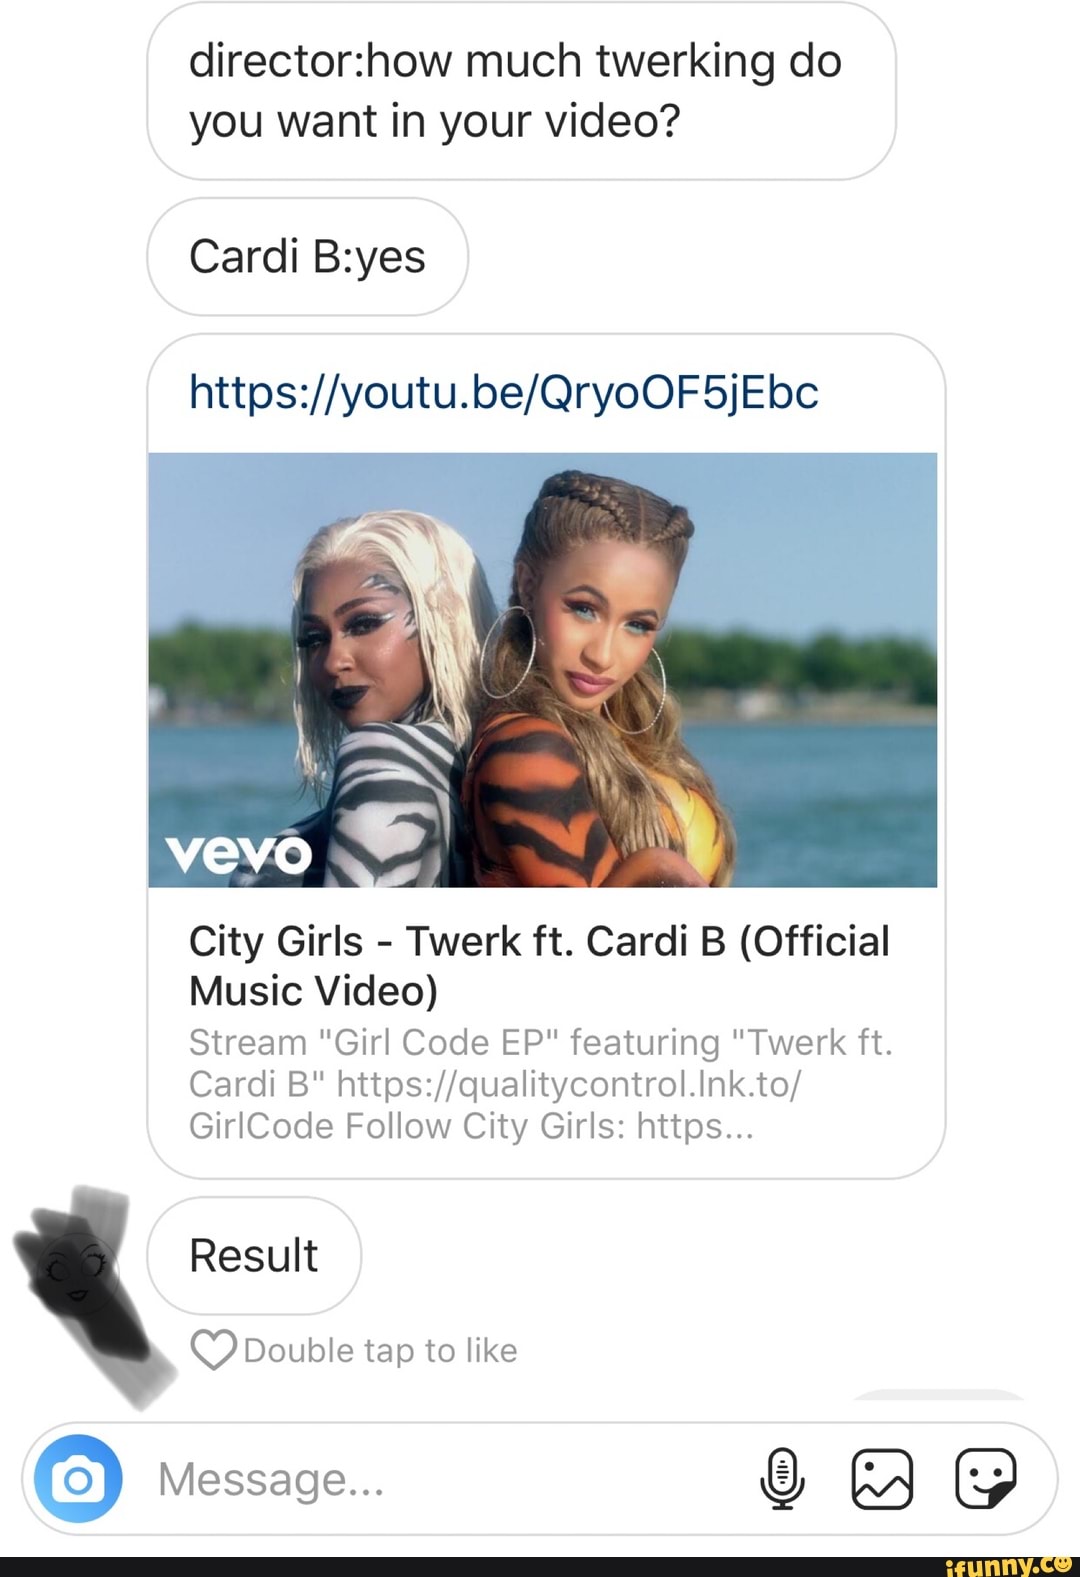 Director How Much Twerking Do You Want In Your Video Https Youtu Be Eroof5ijc City Girls Twerk Ft Cardi B Official Music Video Stream Girl Code Ep Featuring Twerk Ft Cardi B Https Quaiitycontrol Ink To Girlcode Follow - twerk ft cardi b roblox id